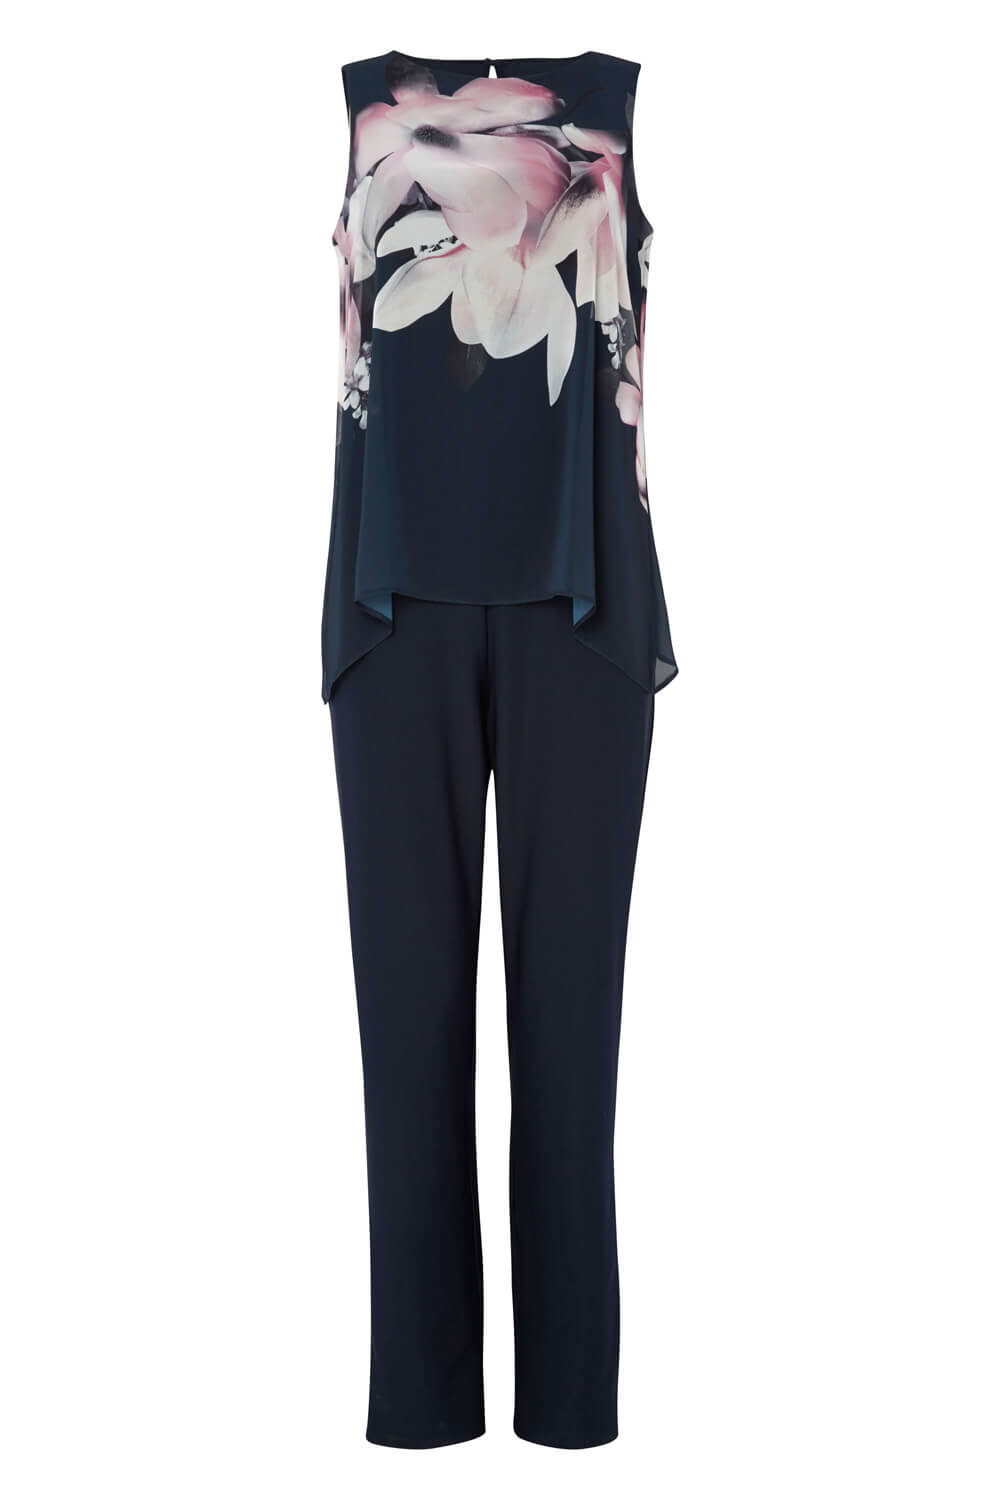 Navy  Floral Print Chiffon Overlay Jumpsuit, Image 4 of 4